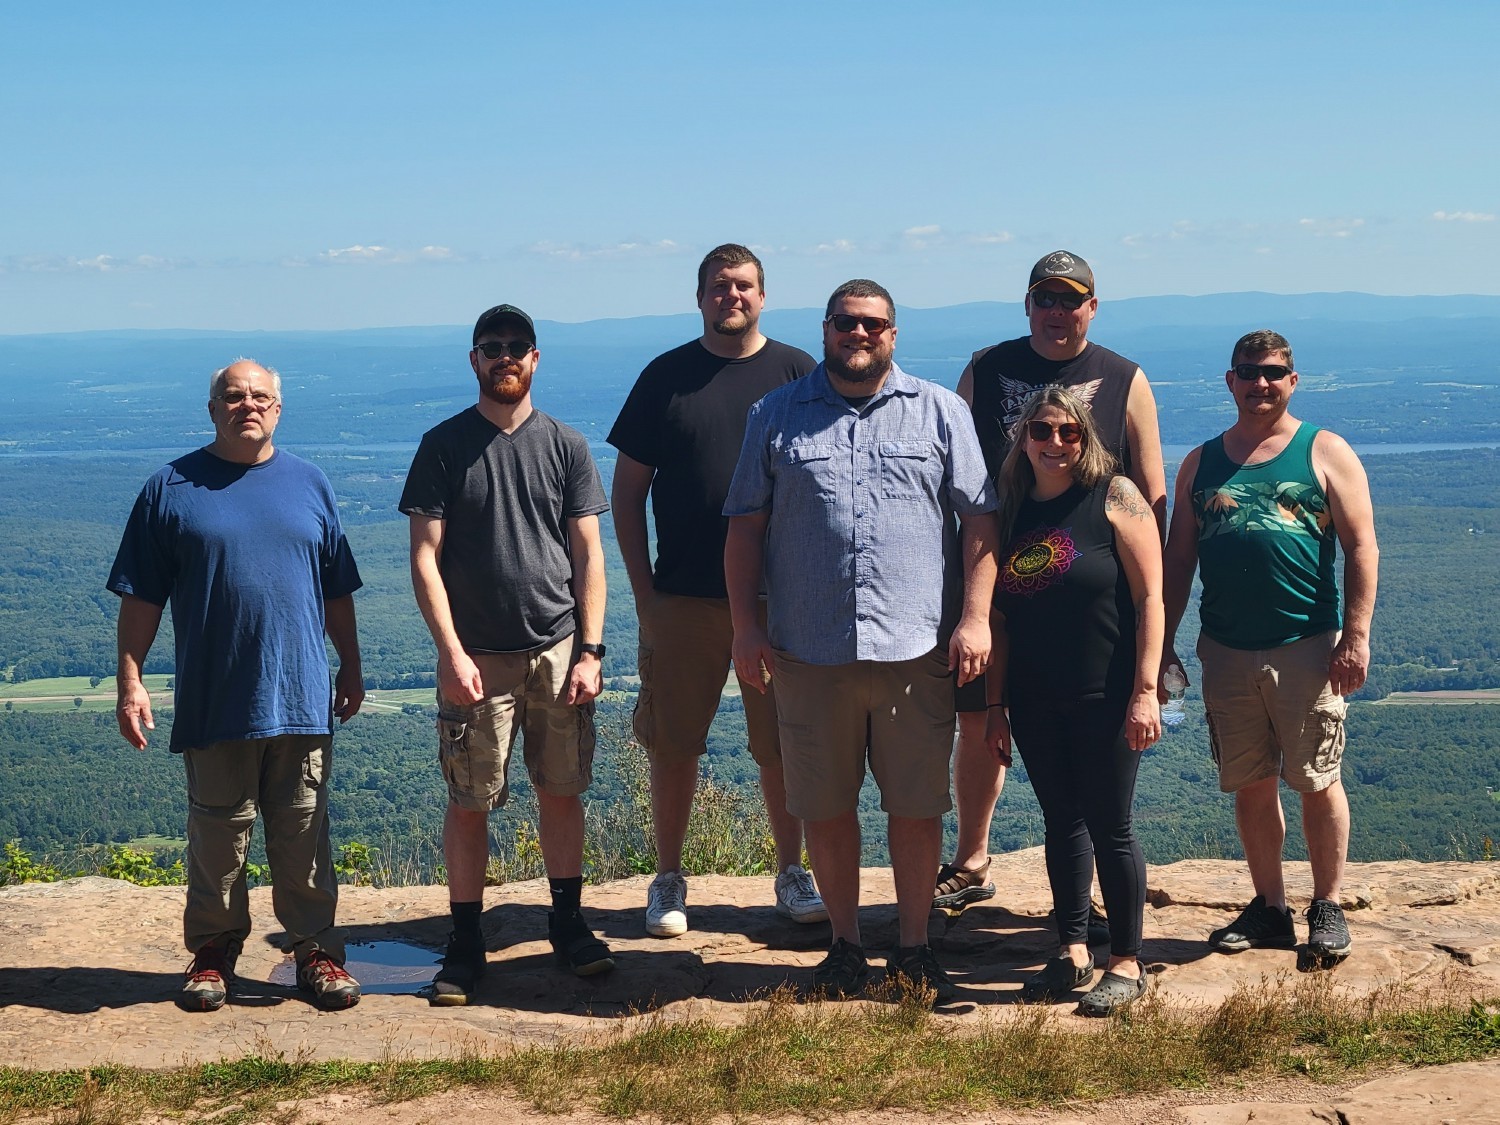 Our Catskill, NY team enjoying summer fun and team building on a hike with a gorgeous backdrop